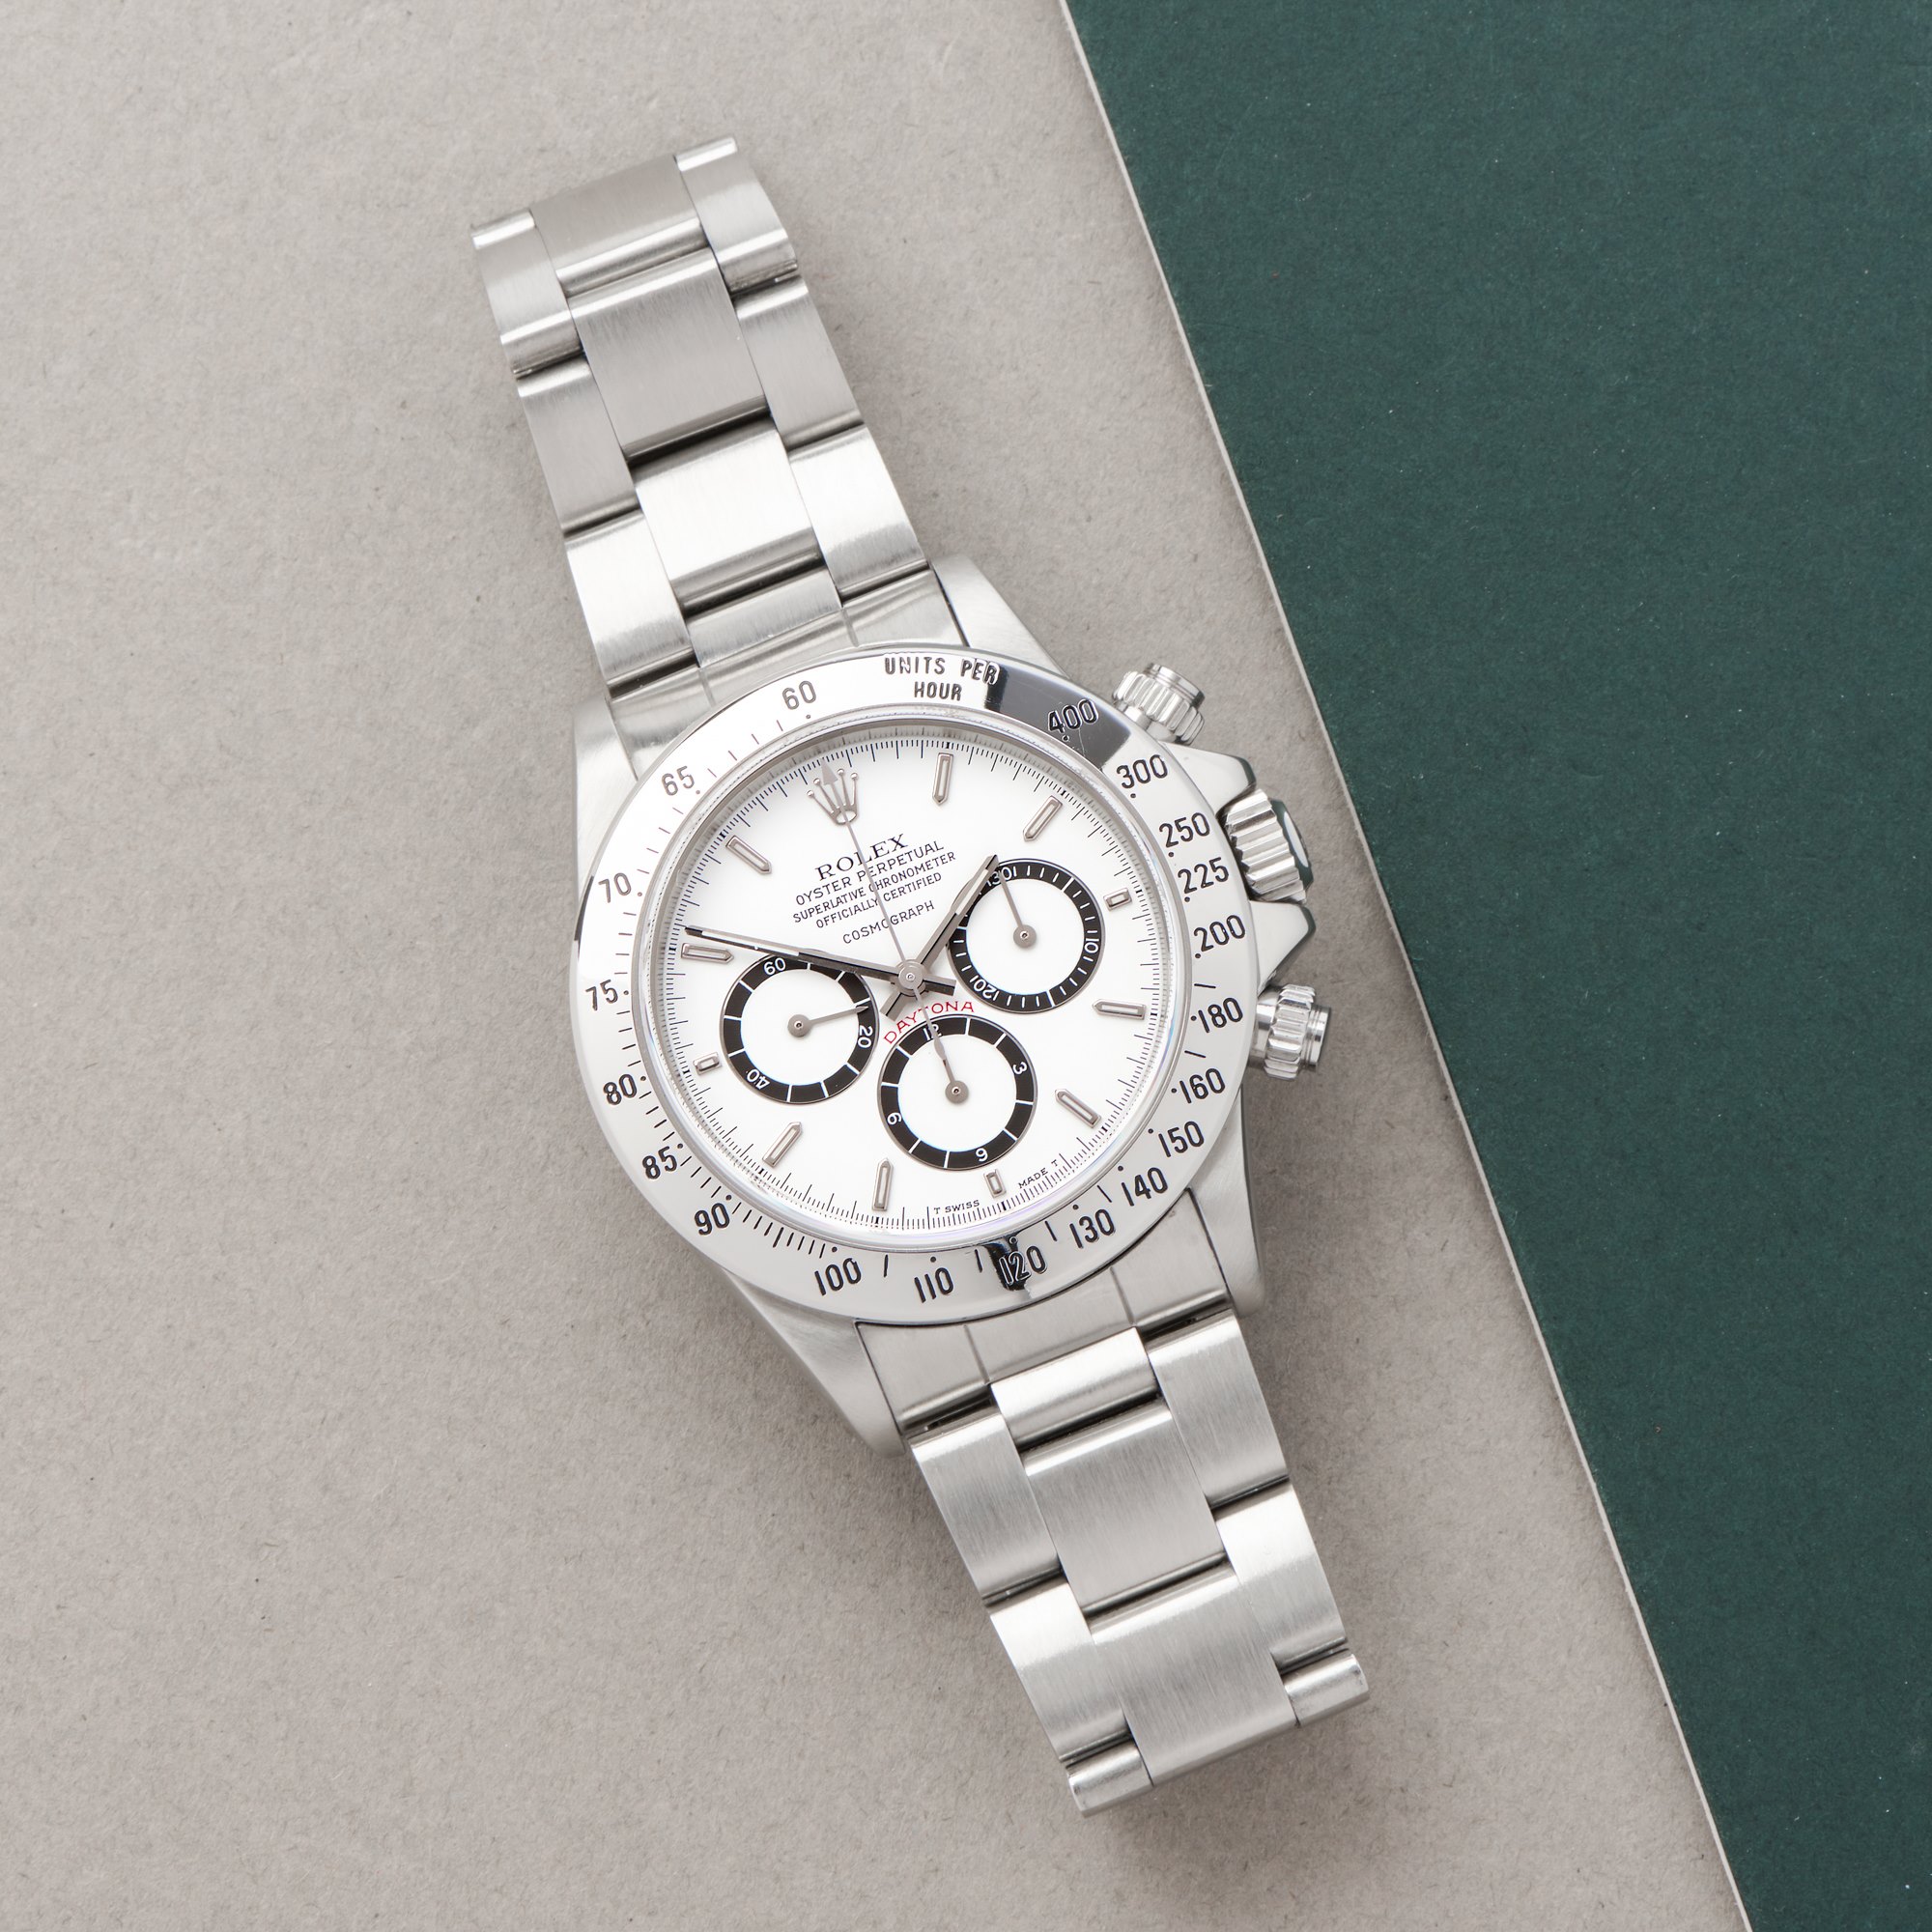 Rolex Daytona Floating Cosmograph, Inverted 6 Roestvrij Staal 16520